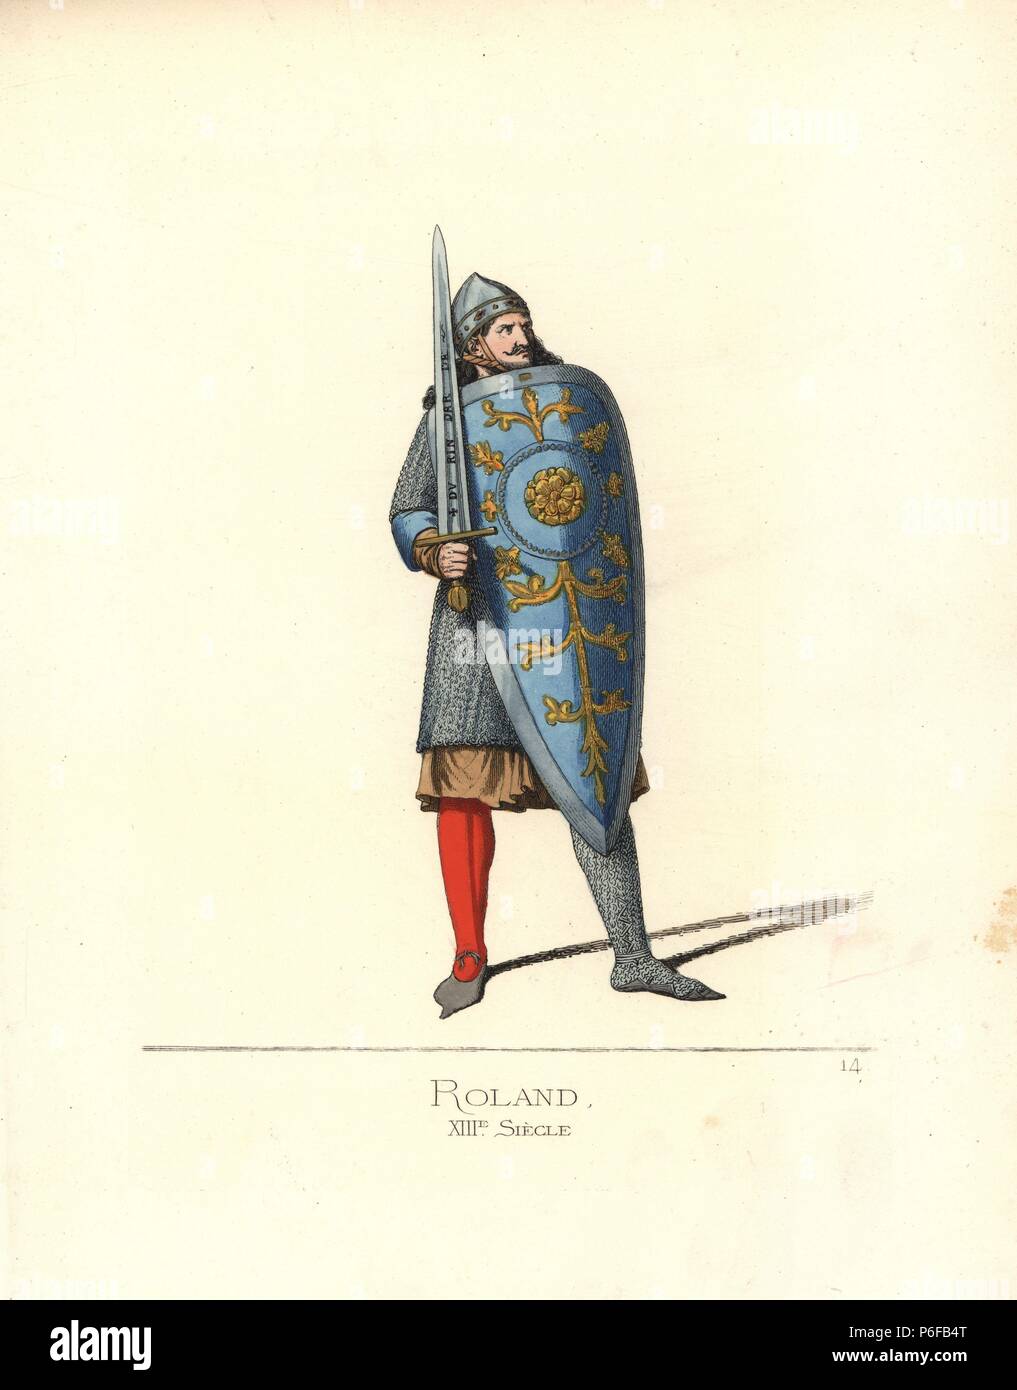 The paladin Roland, from the Song of Roland, 13th century. He wears a  helmet, chainmail tunic, stocking and chainmail legging. He holds a sword  engraved with Durindarda and large shield From a